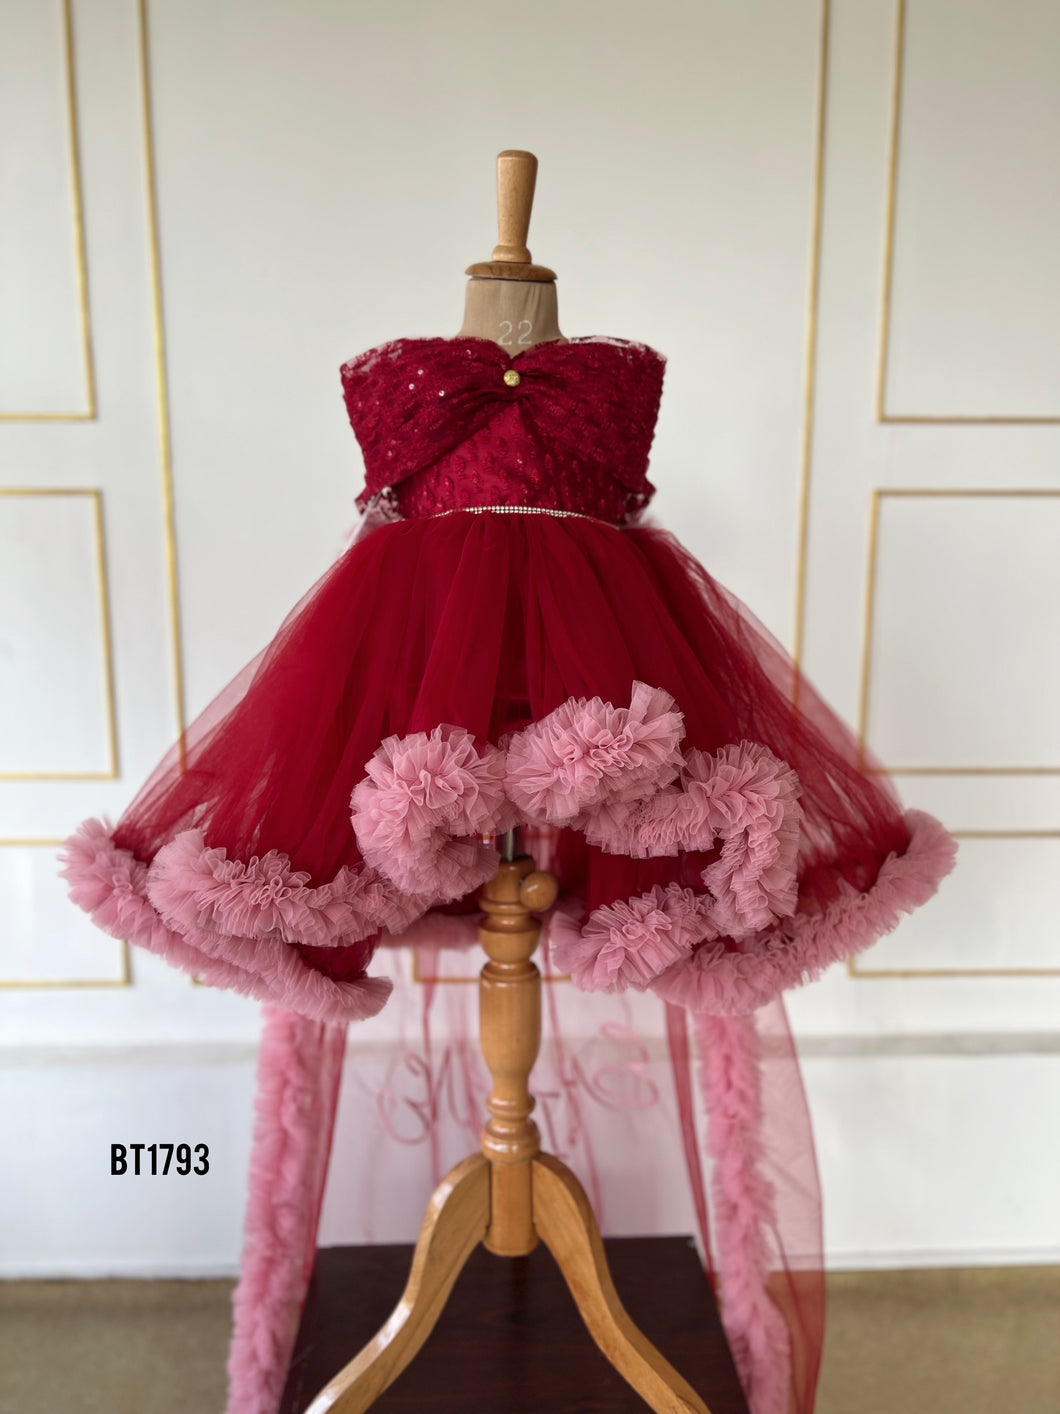 BT1793 Regal Ruby Blossom Gown